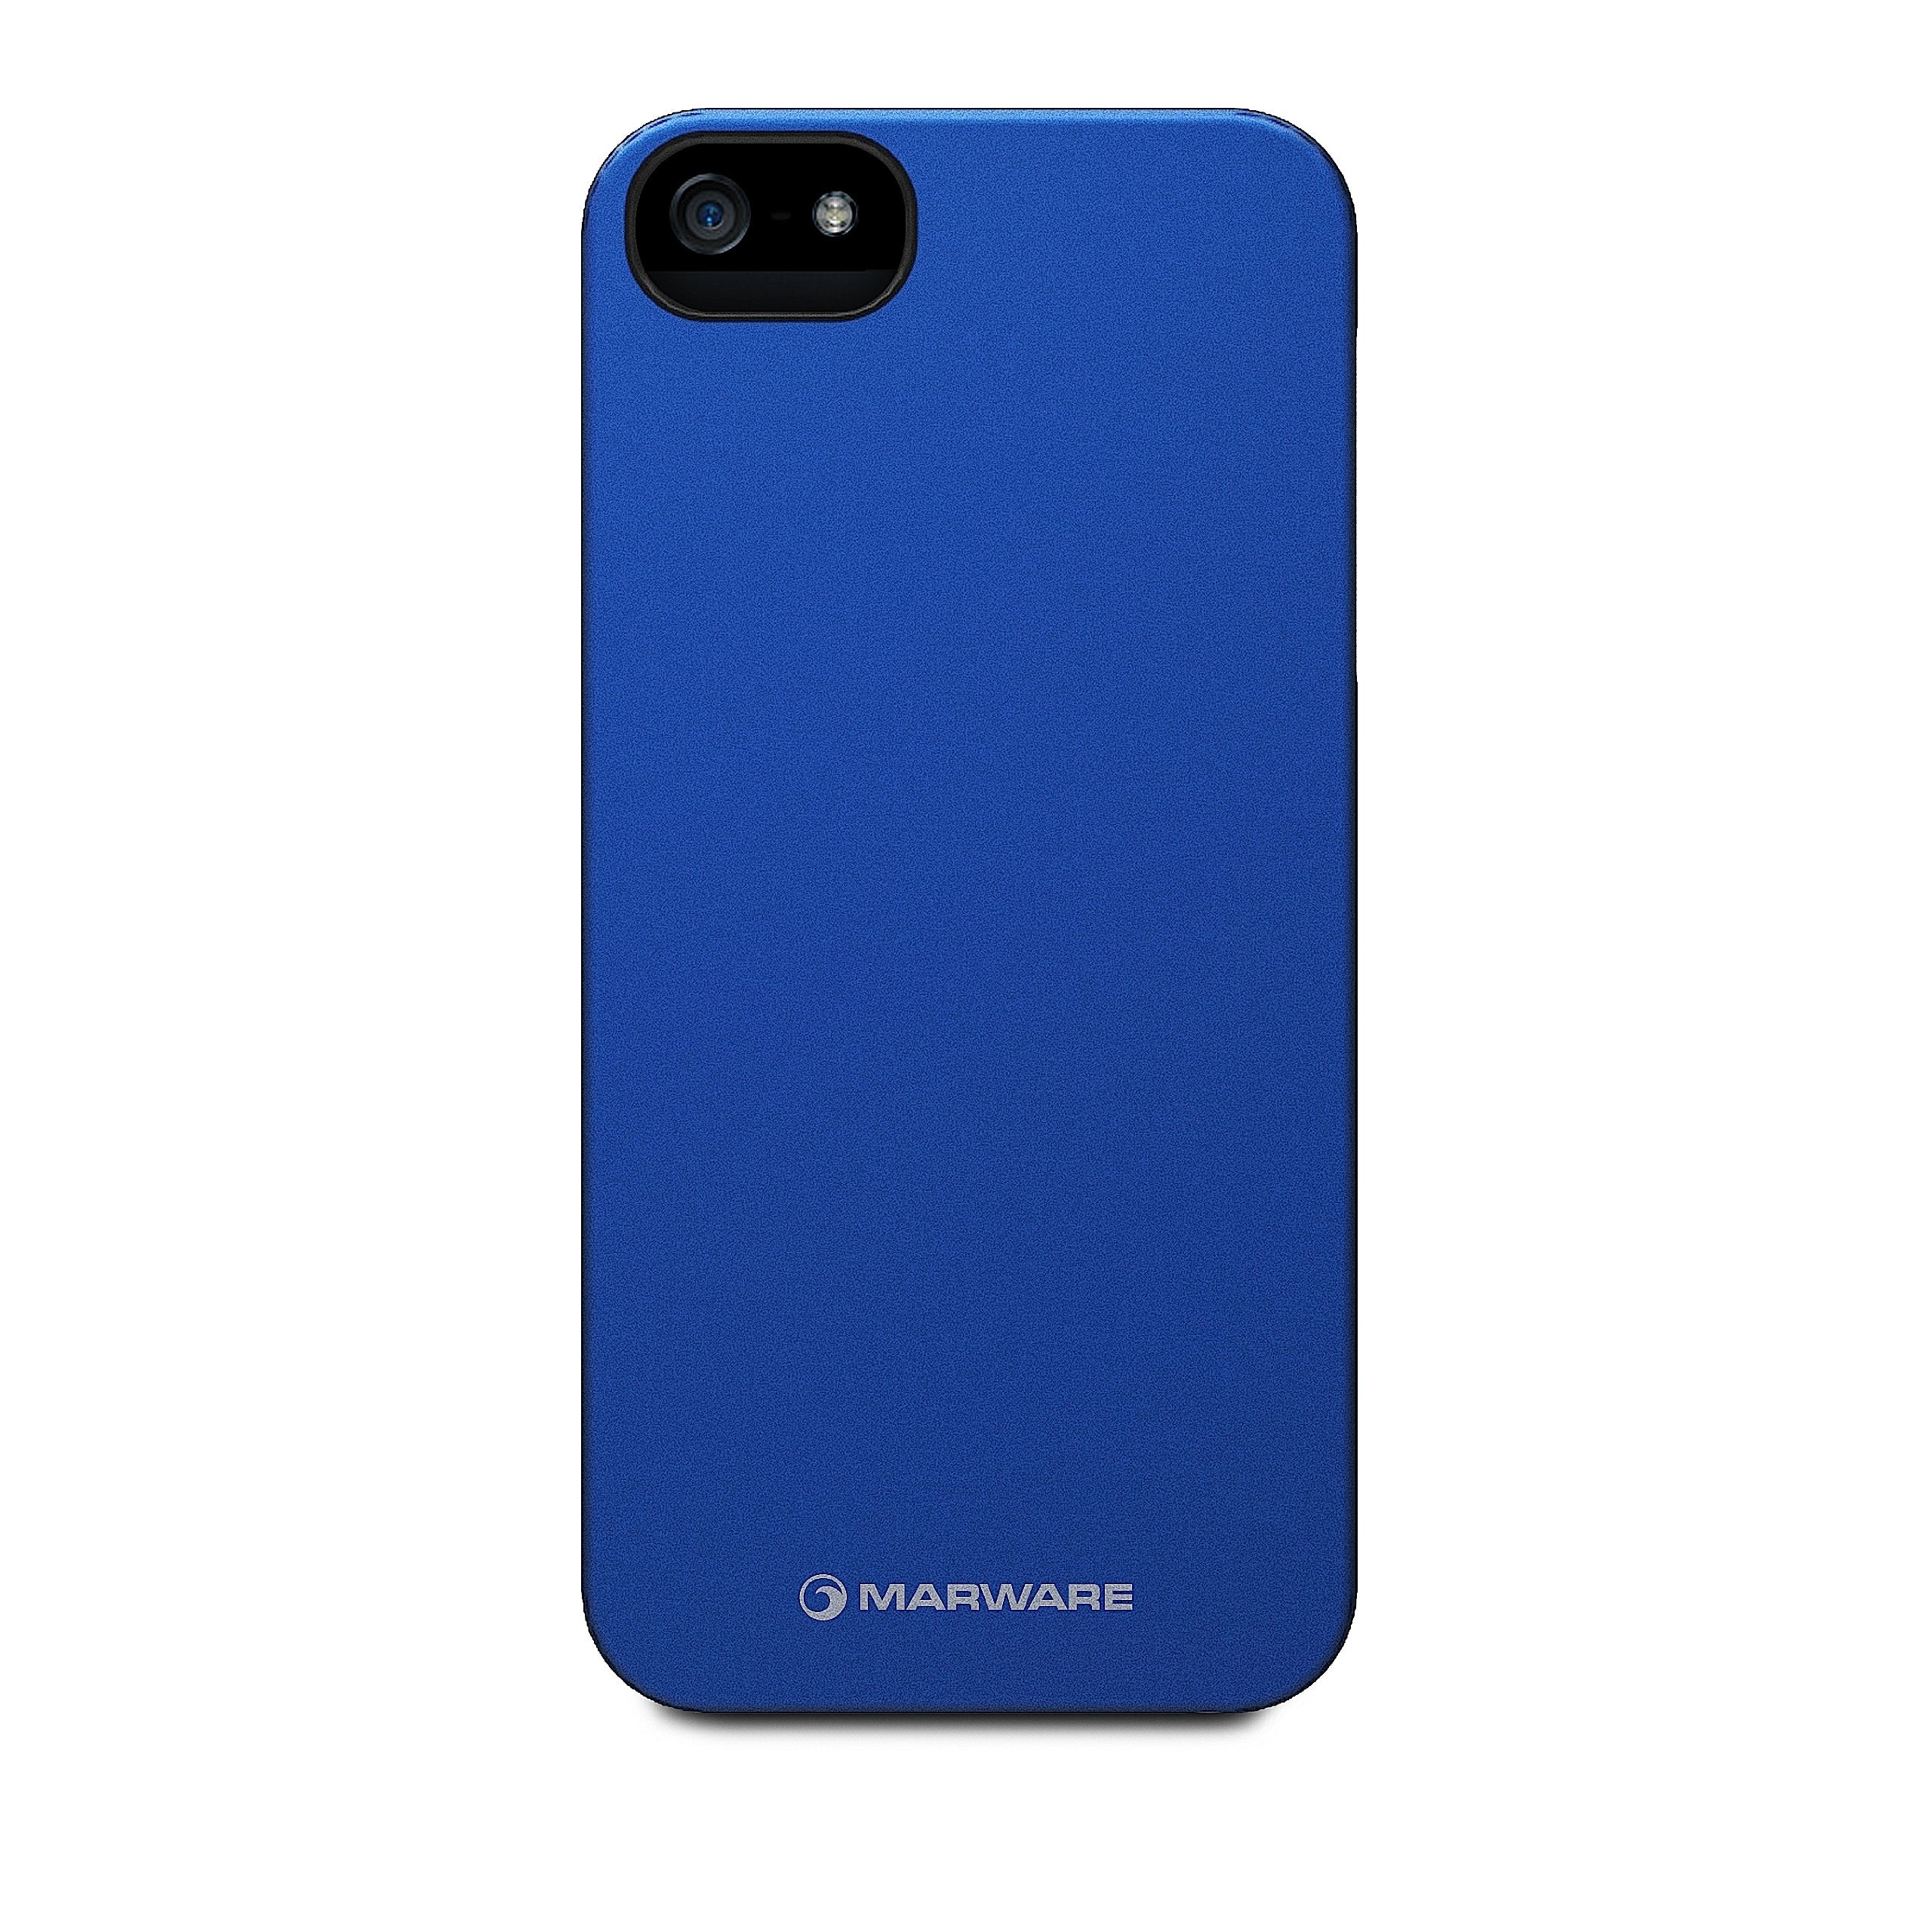 Marware ADMS1016 Microshell Case for iPhone 5 - 1 Pack - Retail Packaging - Blue